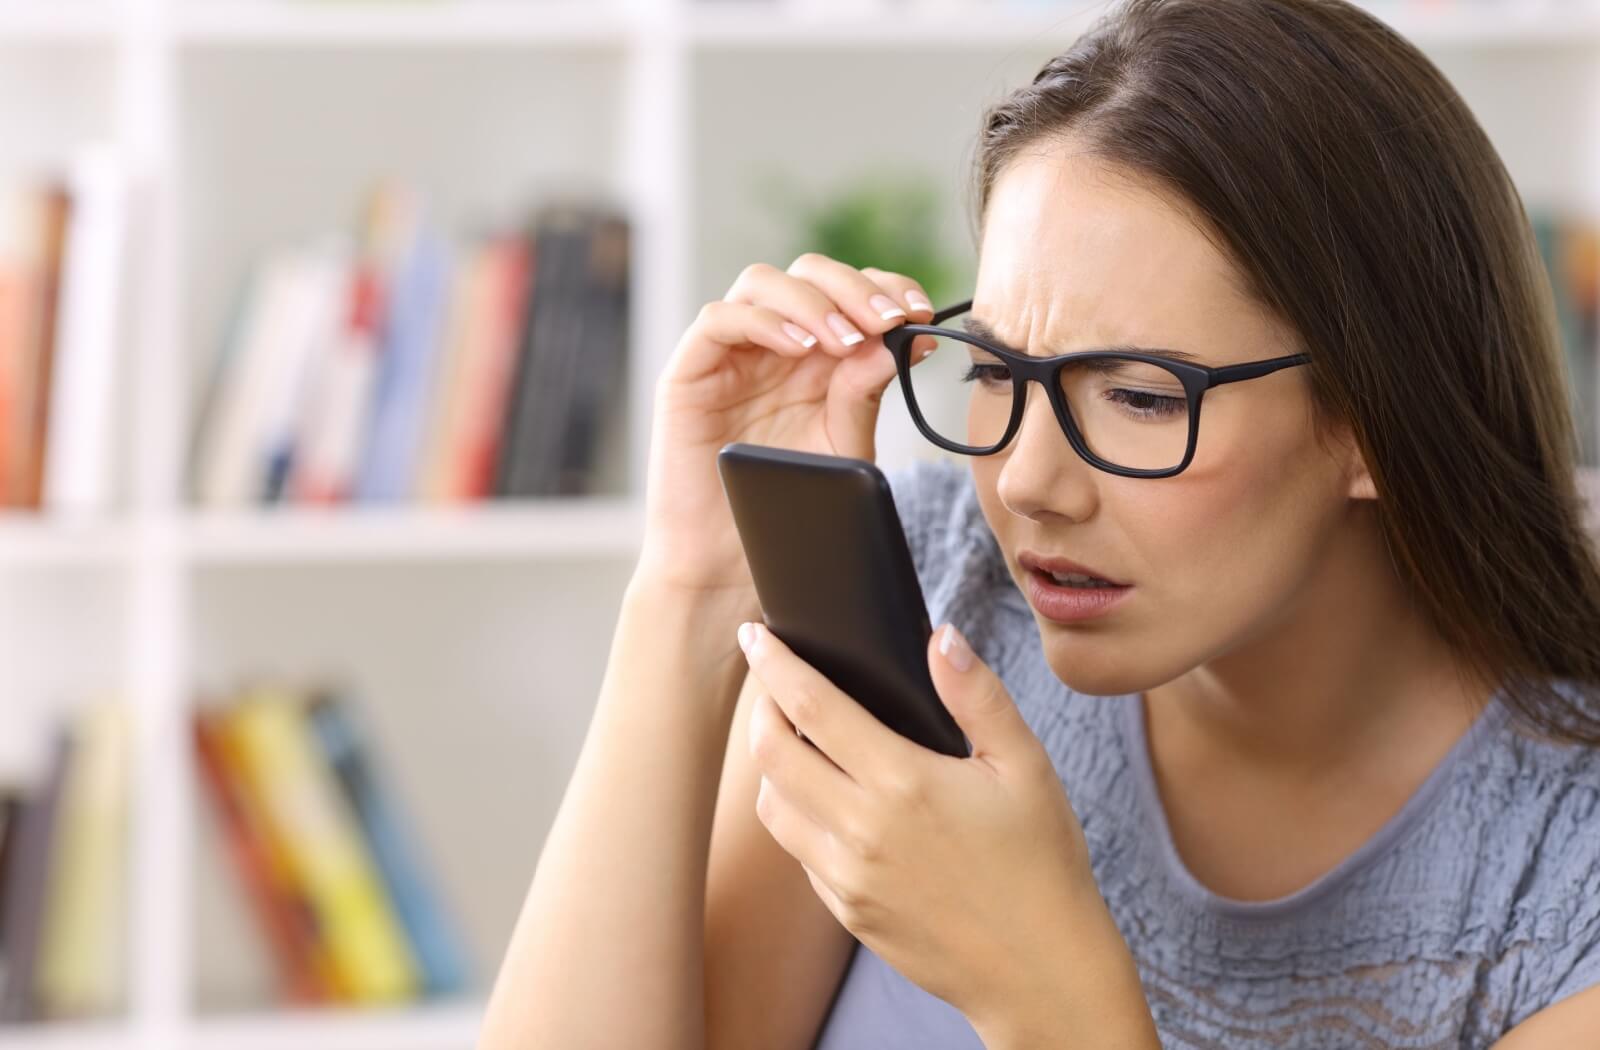 A woman holding her phone close to her face while adjusting her glasses to see its contents better.